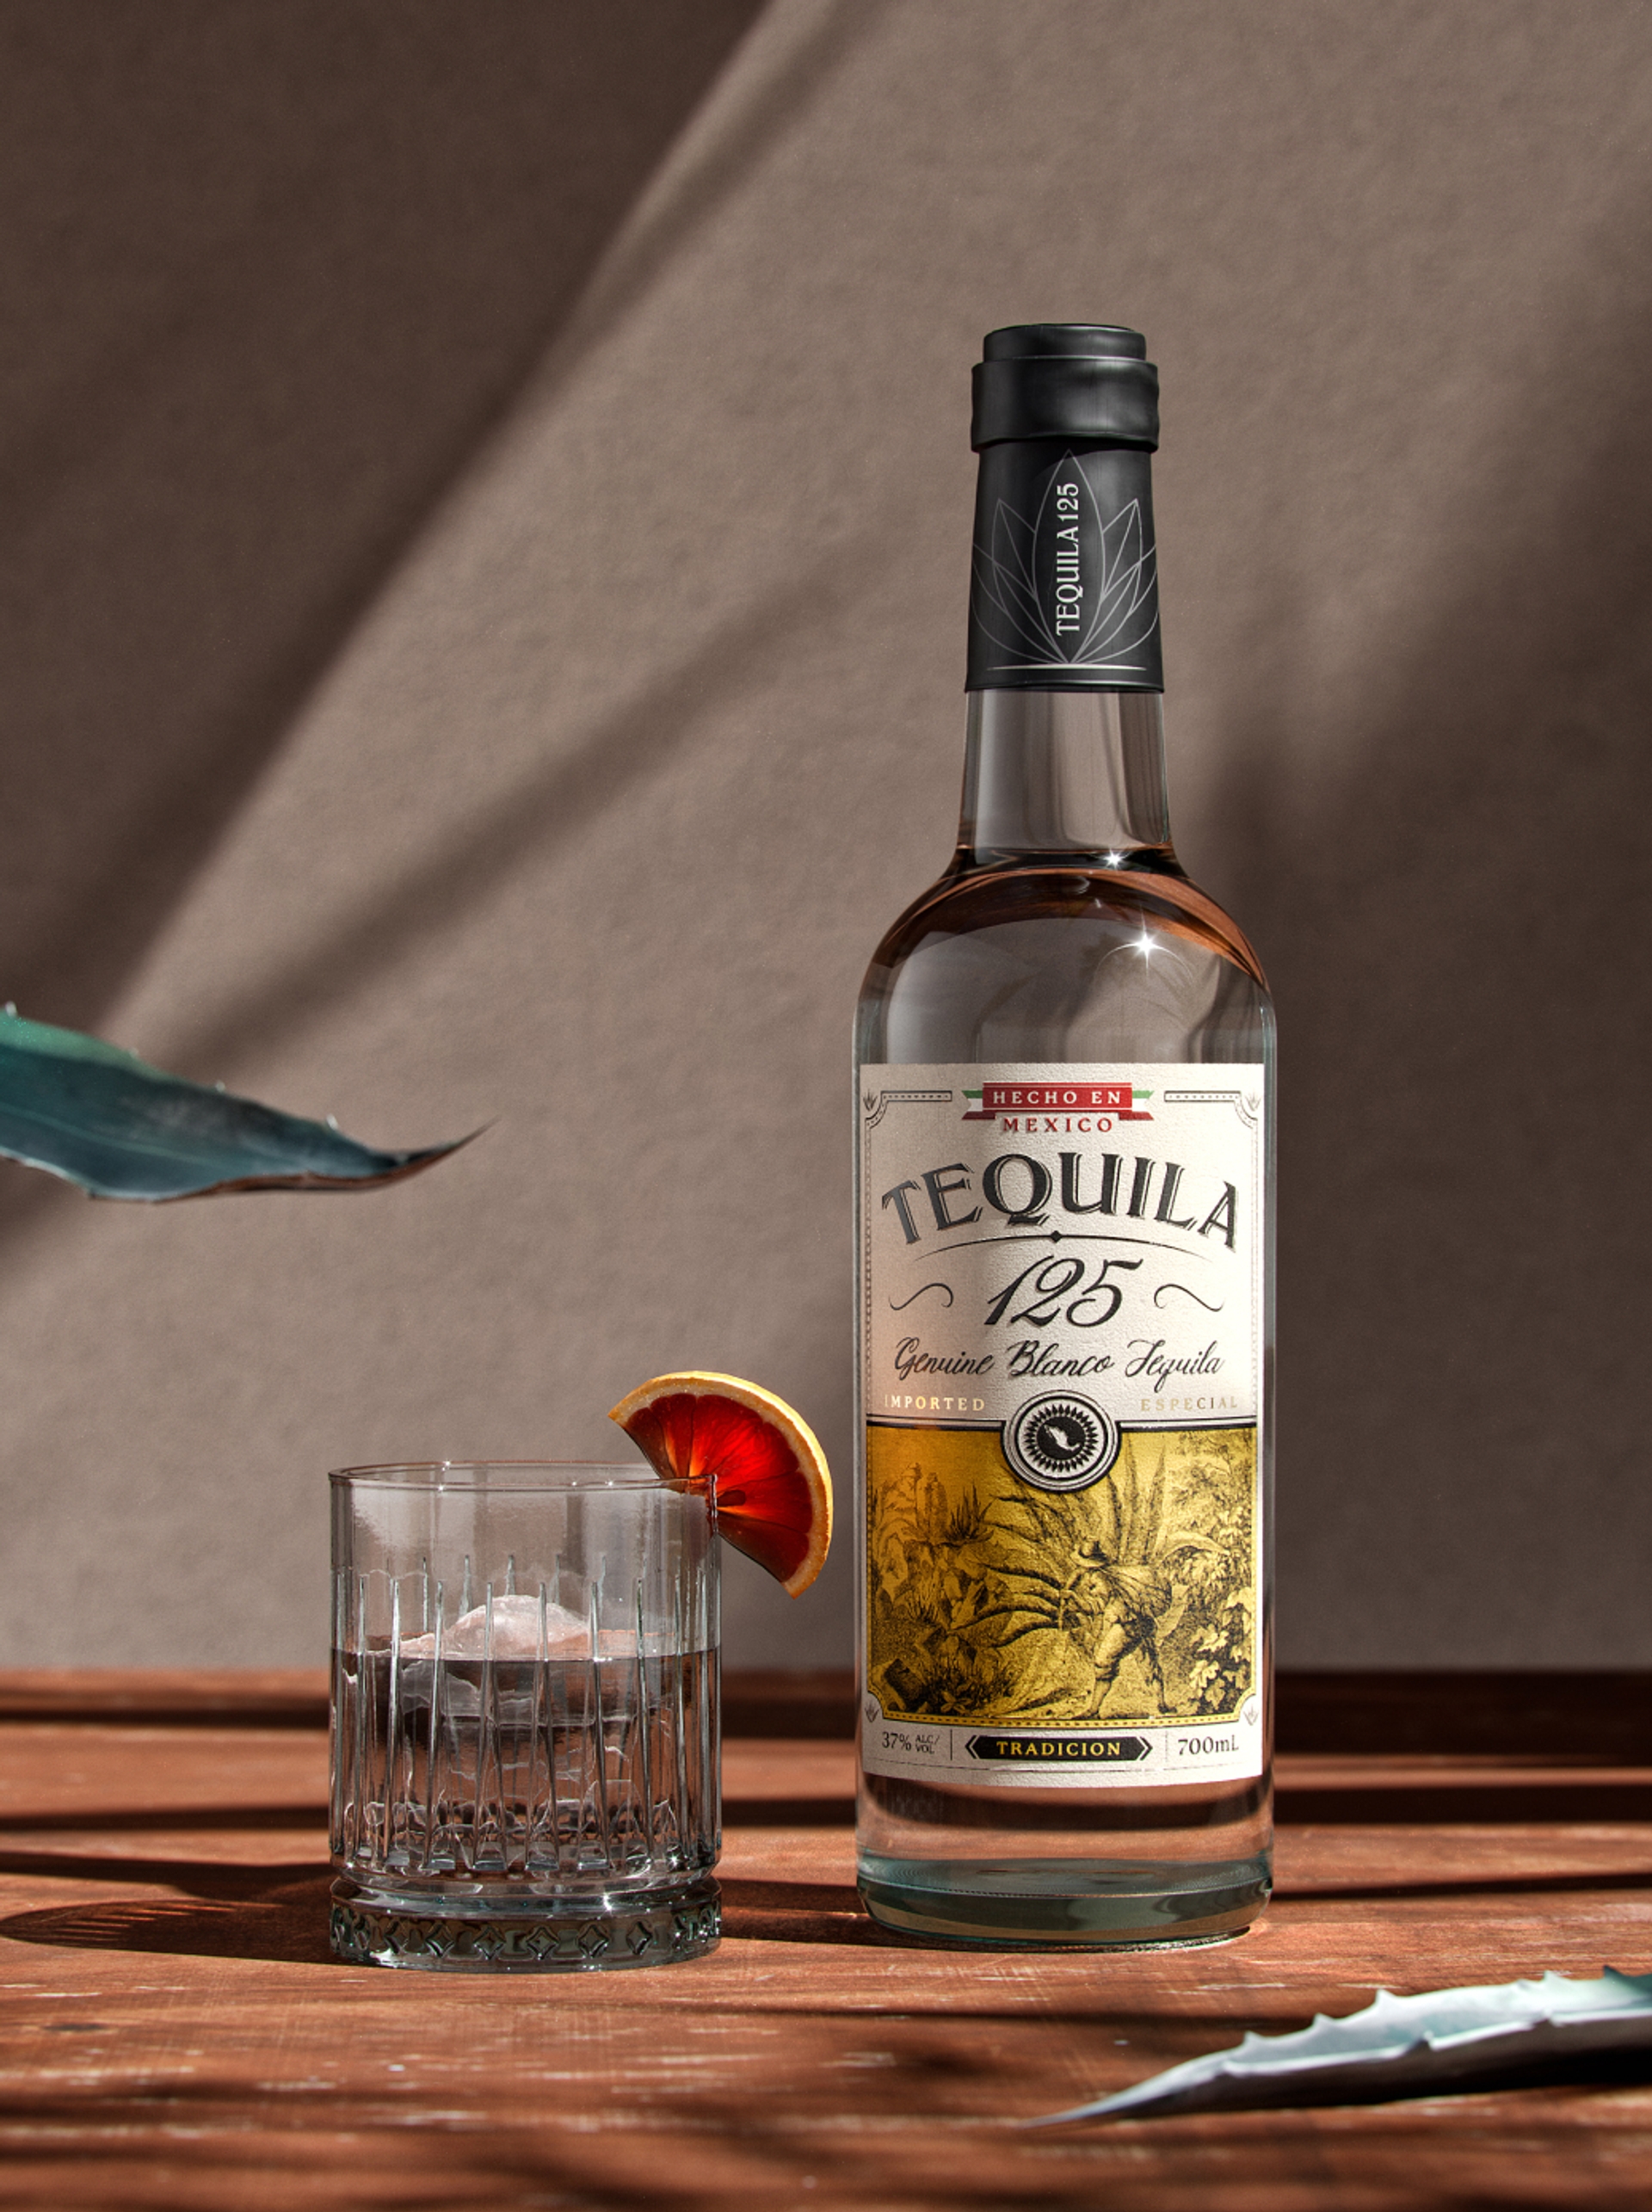 A bottle of Tequila 125 on a wooden table with a glass of tequila, brand and packaging design by Sydney London design agency Our Revolution Jen Doran